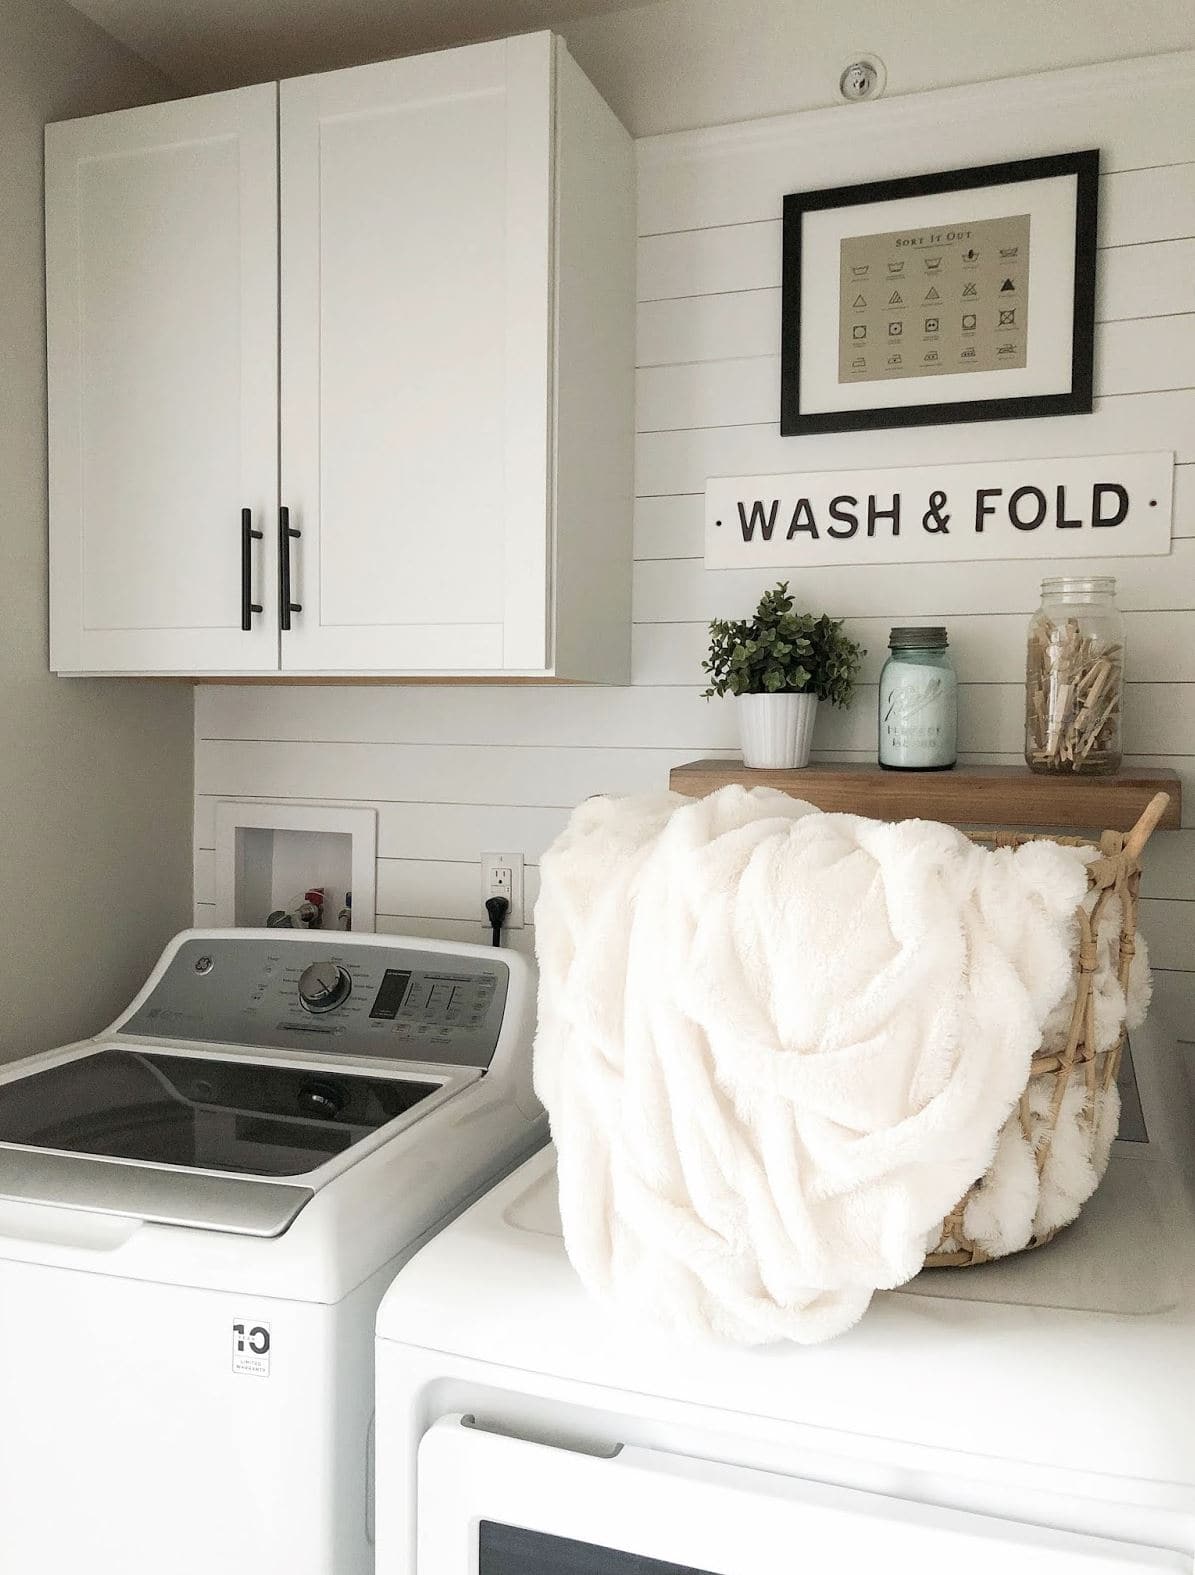 A farmhouse style laundry room with shiplap and a "wash & fold" sign.